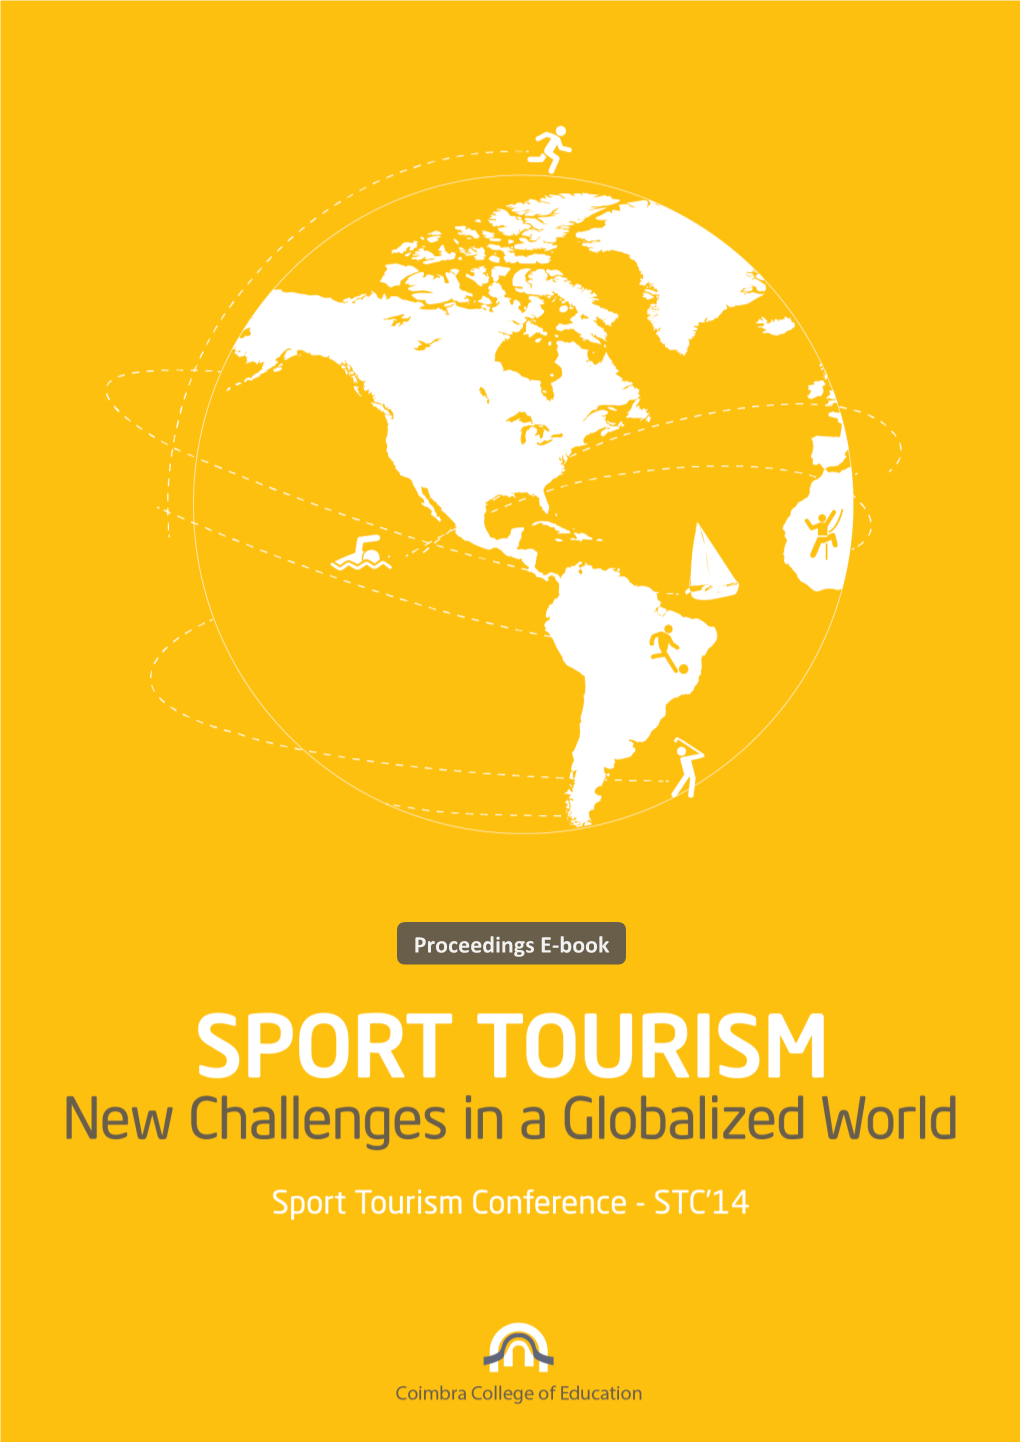 SPORT TOURISM New Challenges in a Globalized World